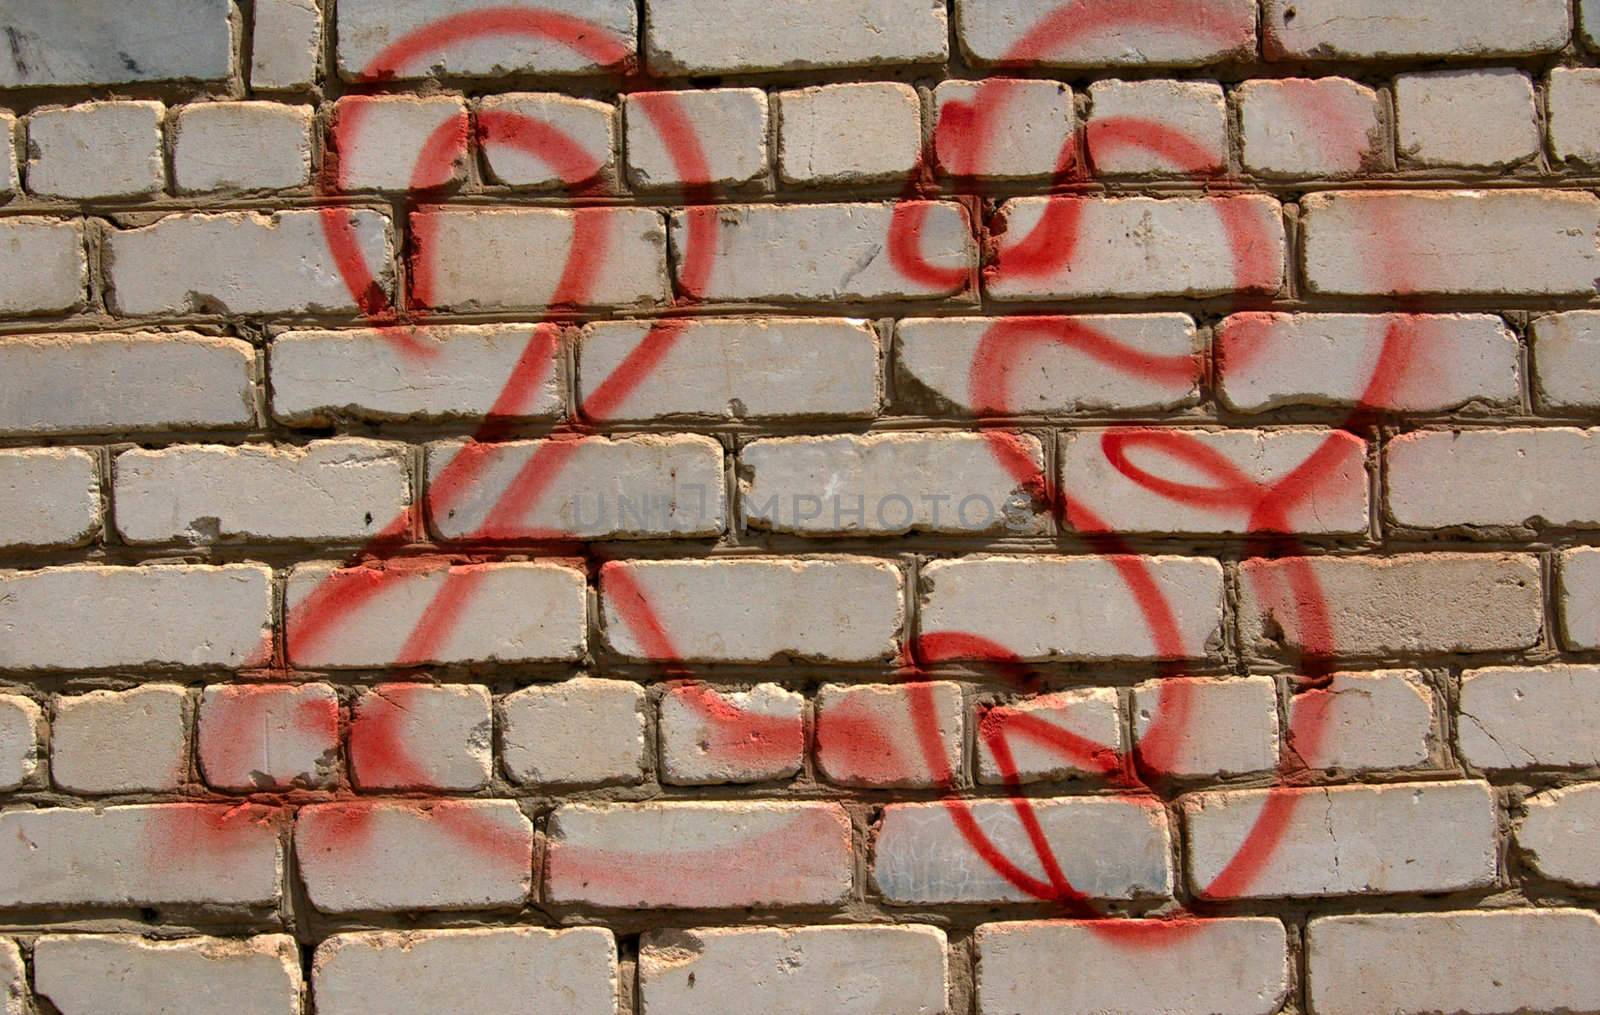 close-up of unskillful graffiti of red color - namber 23